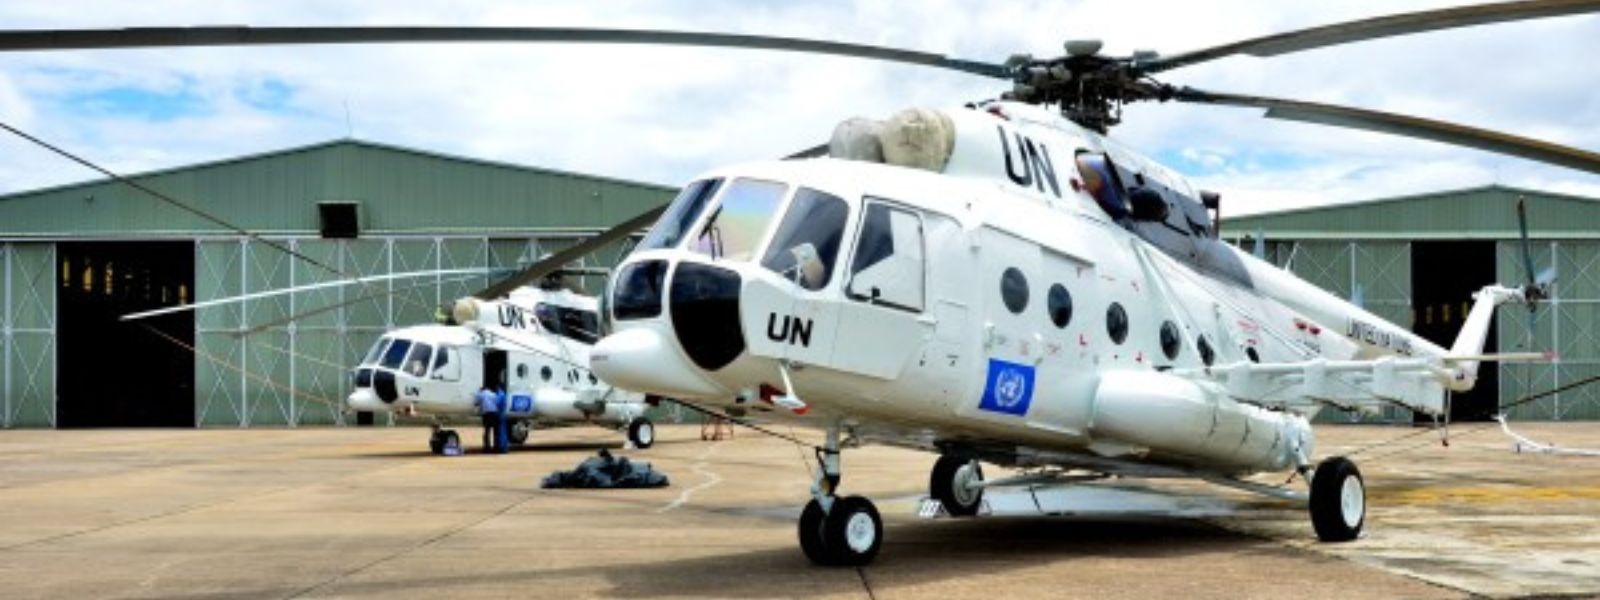 SL Peacekeeping Helicopter Involved in Accident